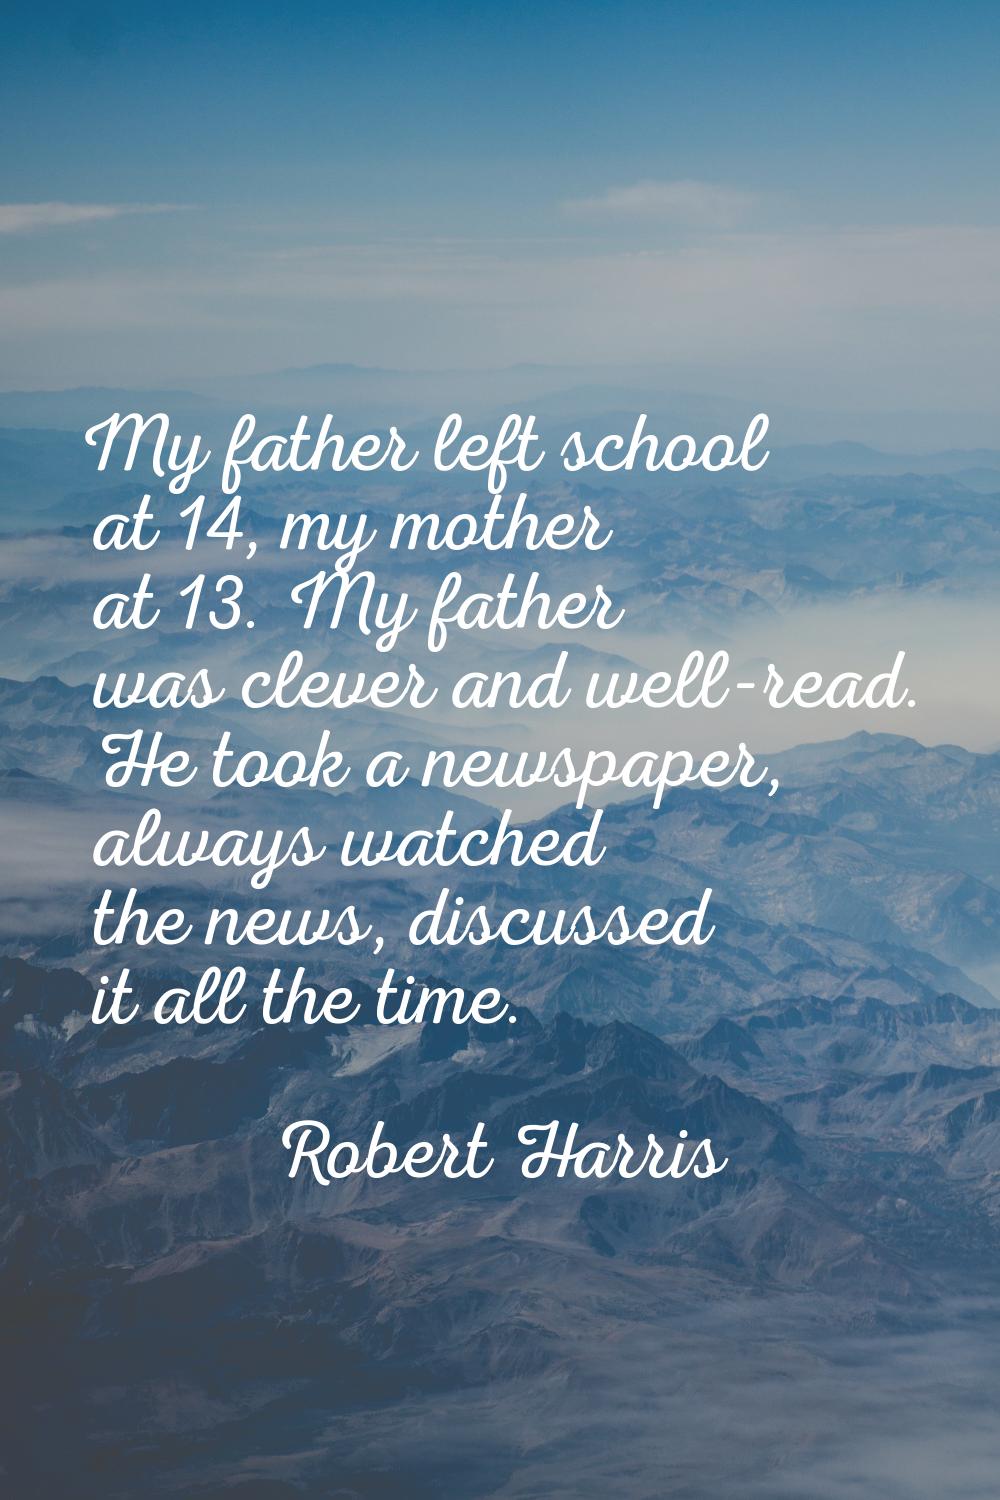 My father left school at 14, my mother at 13. My father was clever and well-read. He took a newspap